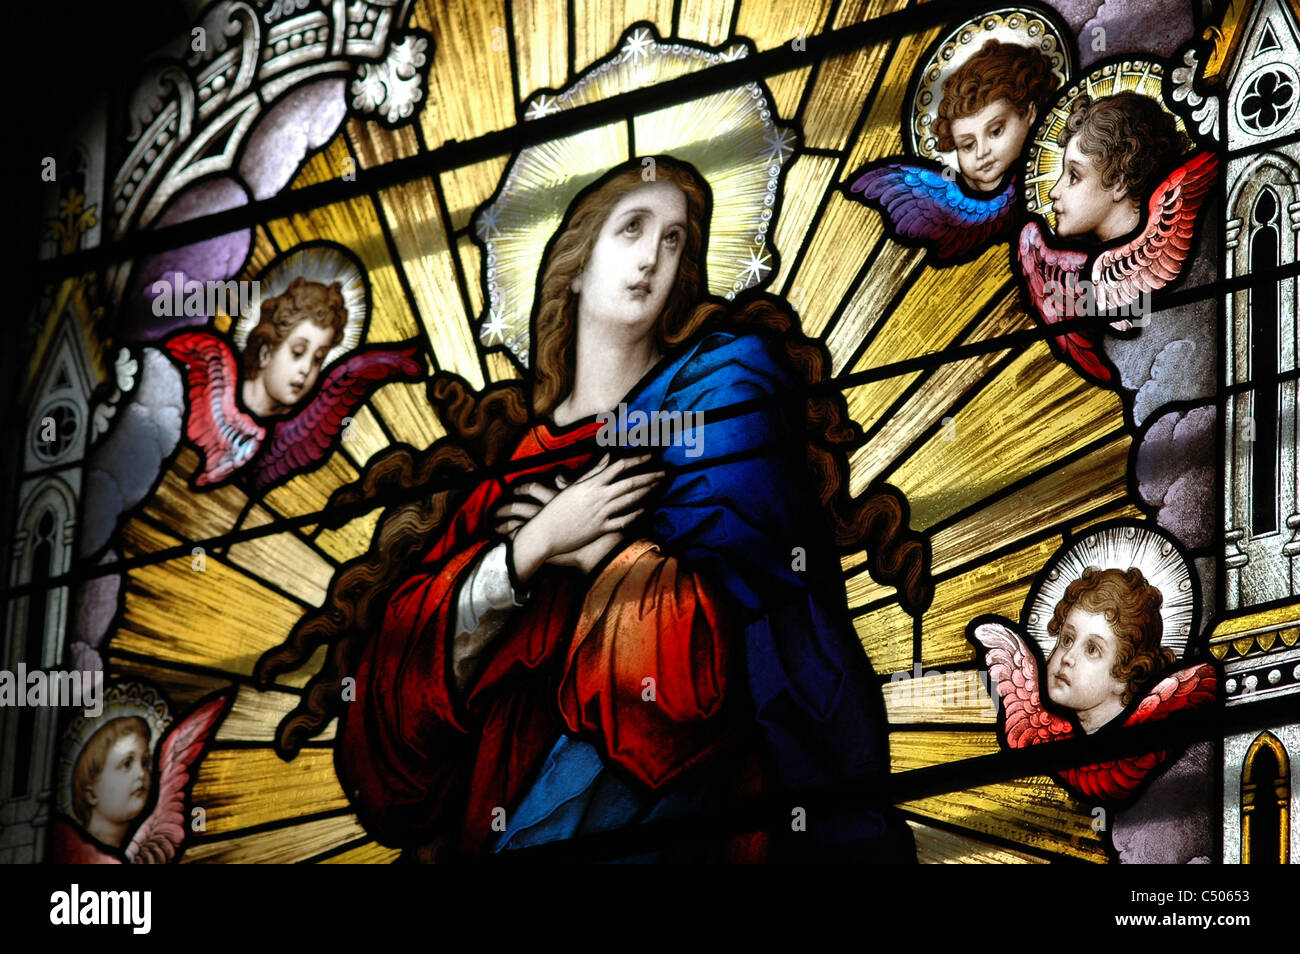 A stained glass window depicting an angel. Stock Photo